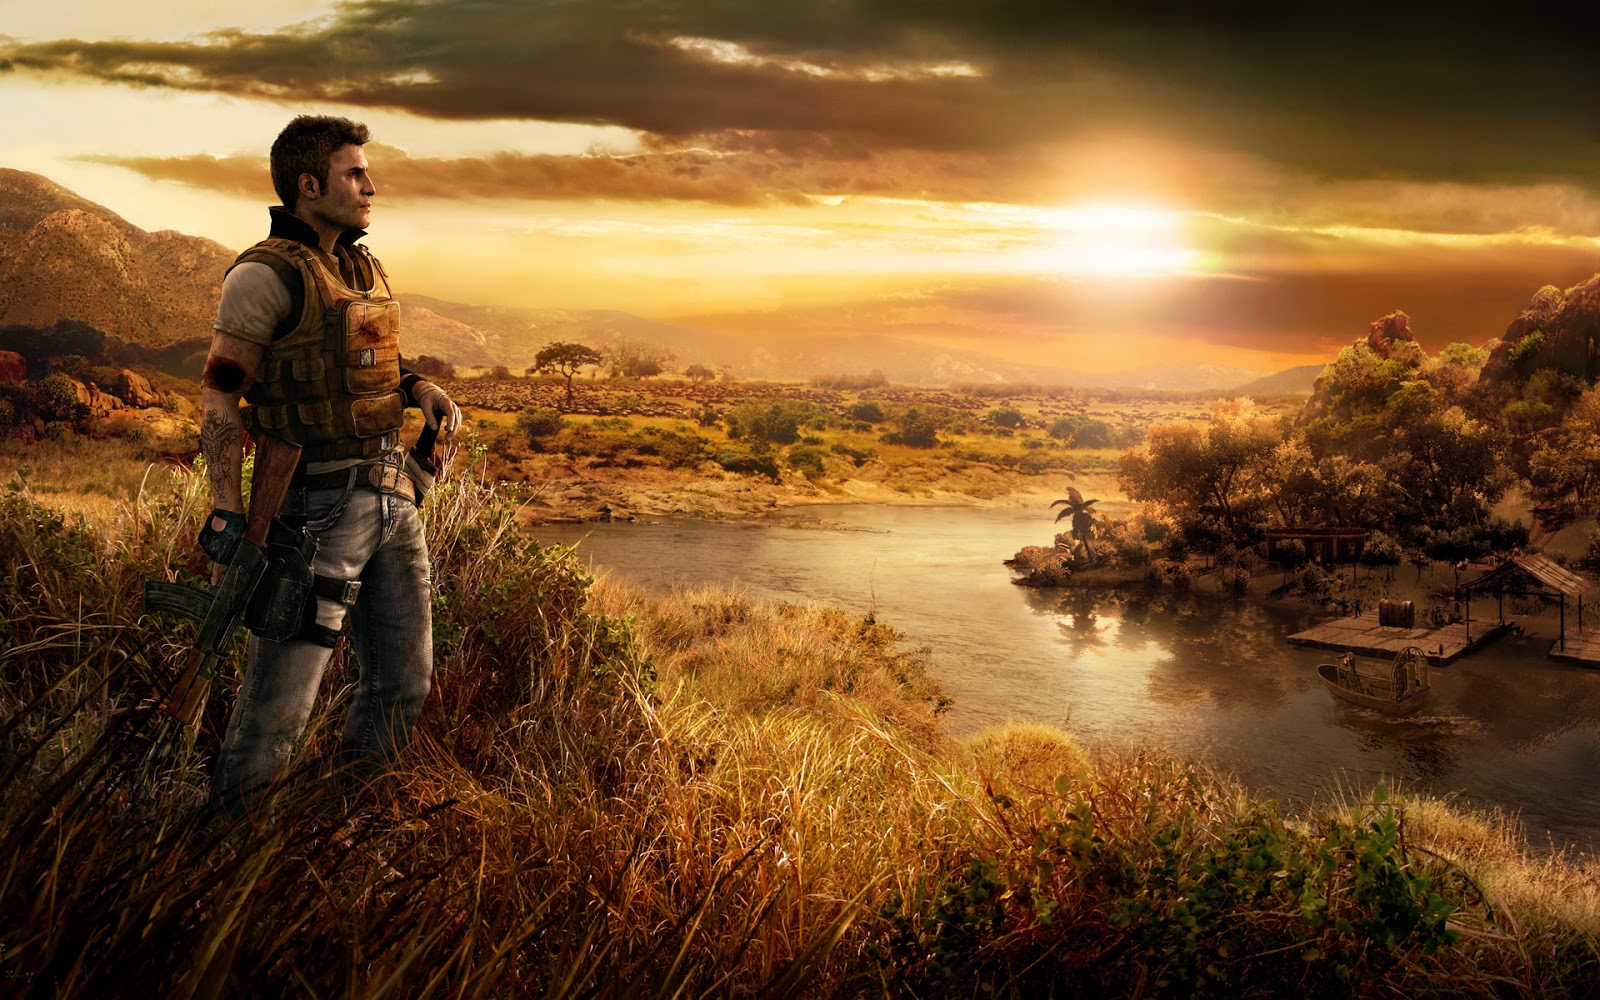 Enjoy This Awesome Epic HD Wallpaper On Your Desktop You Can